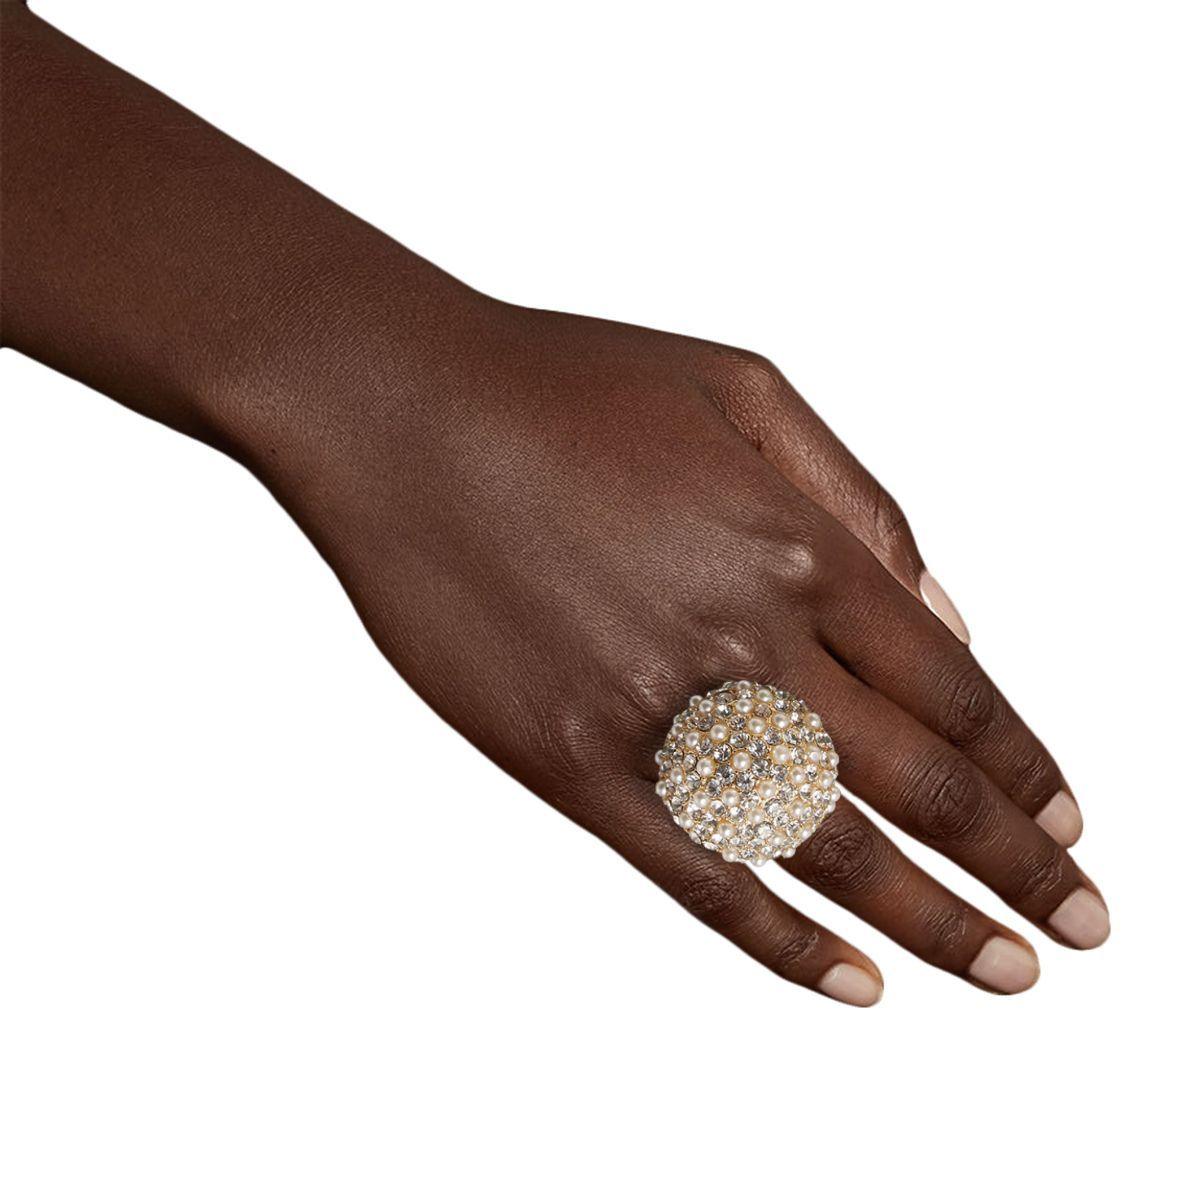 Get Noticed with Our Rhinestone Faux Pearl Statement Ring - Shop Now